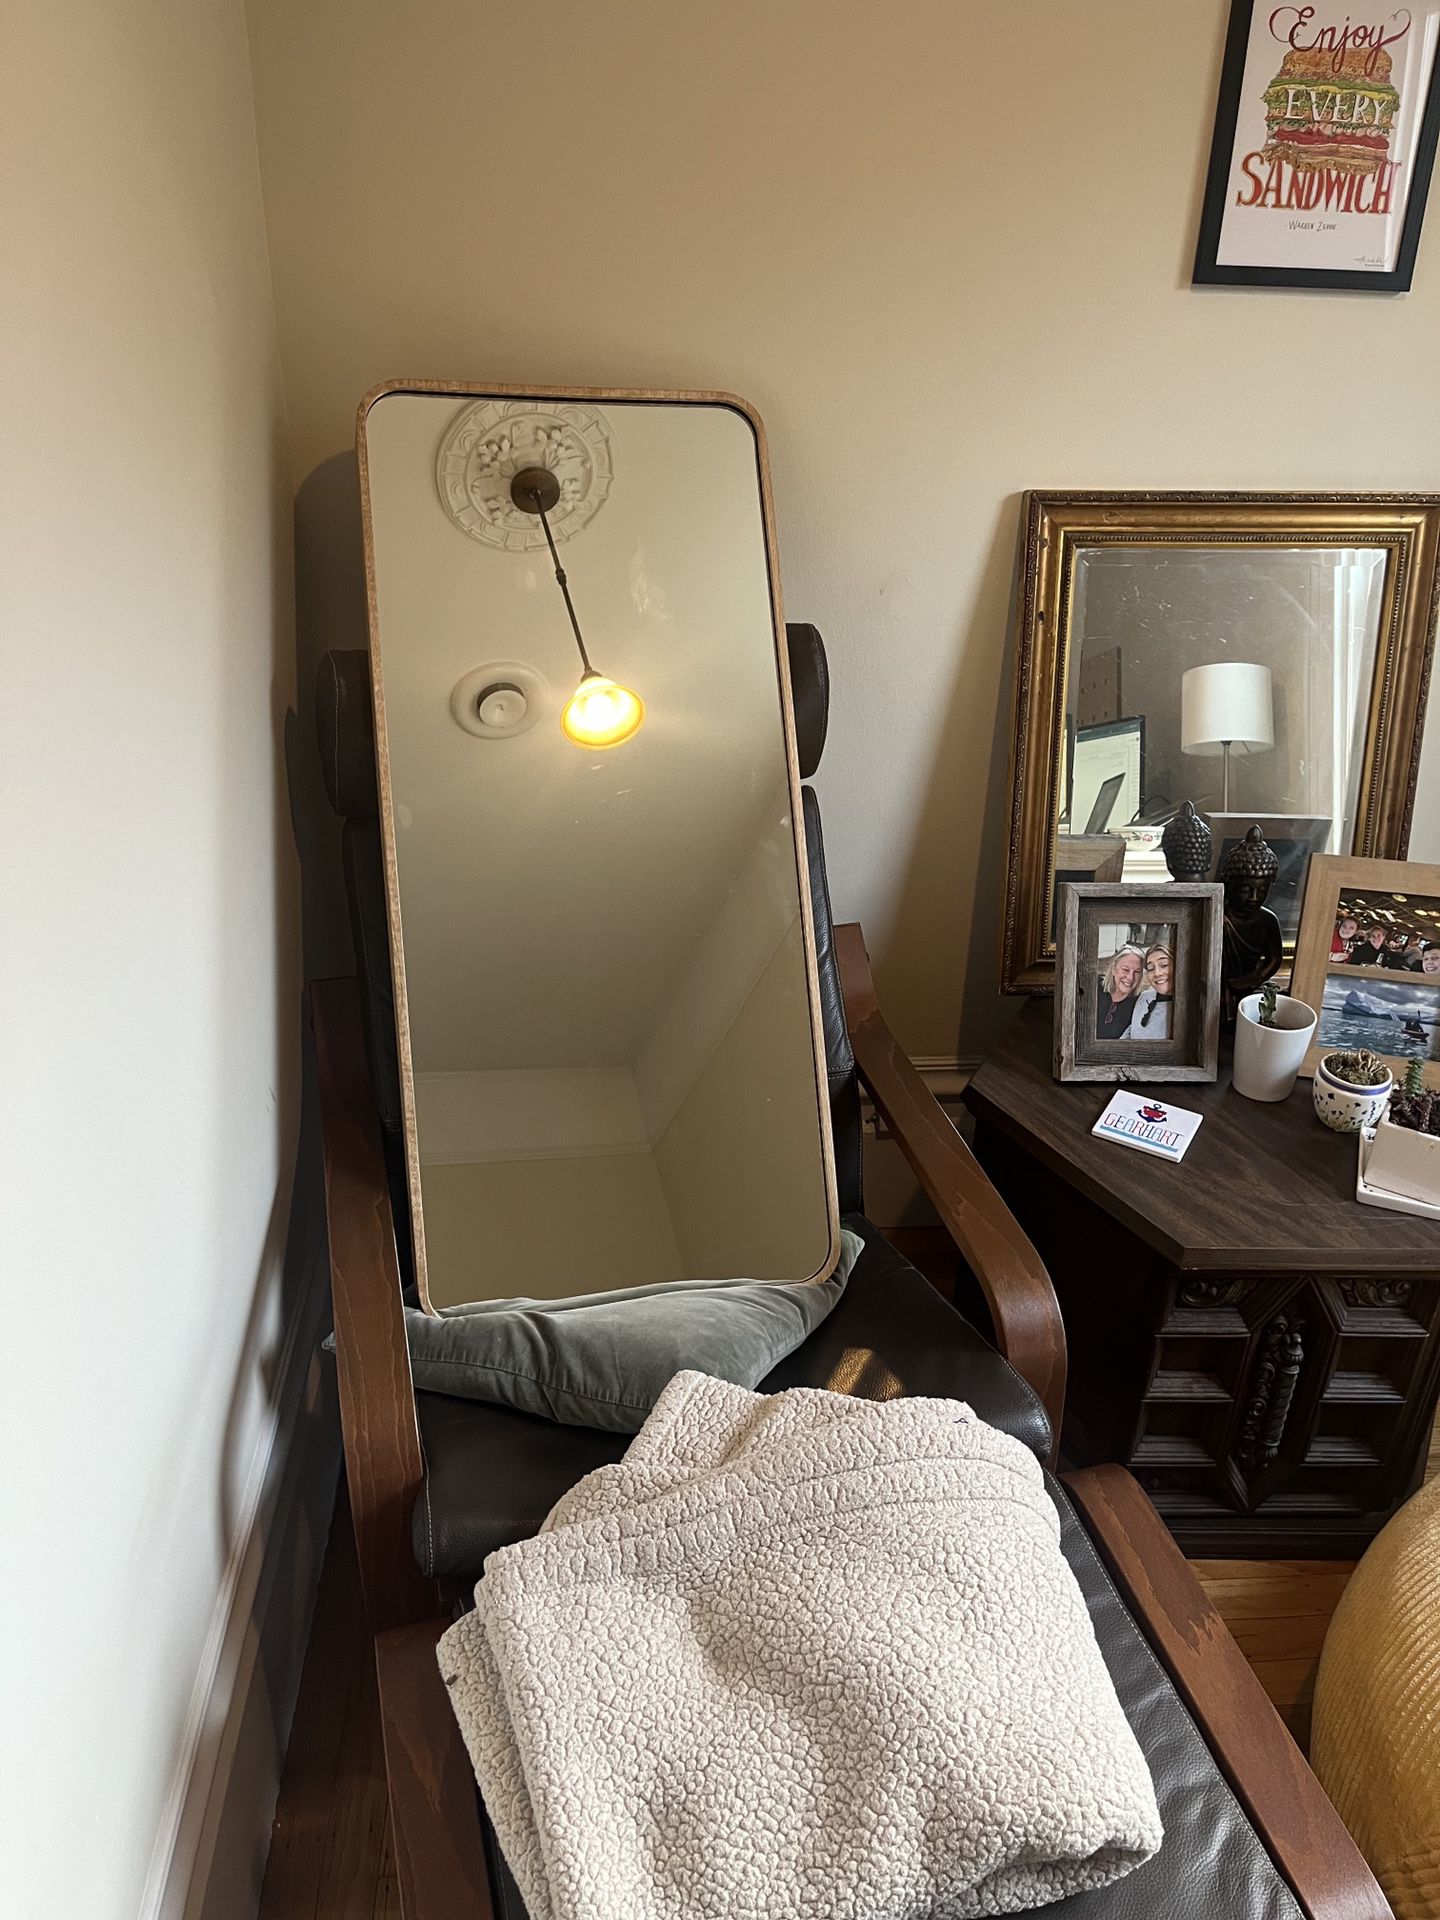 Brand new 40 By 18 Inch Vanity Full Mirror With Wall Mount